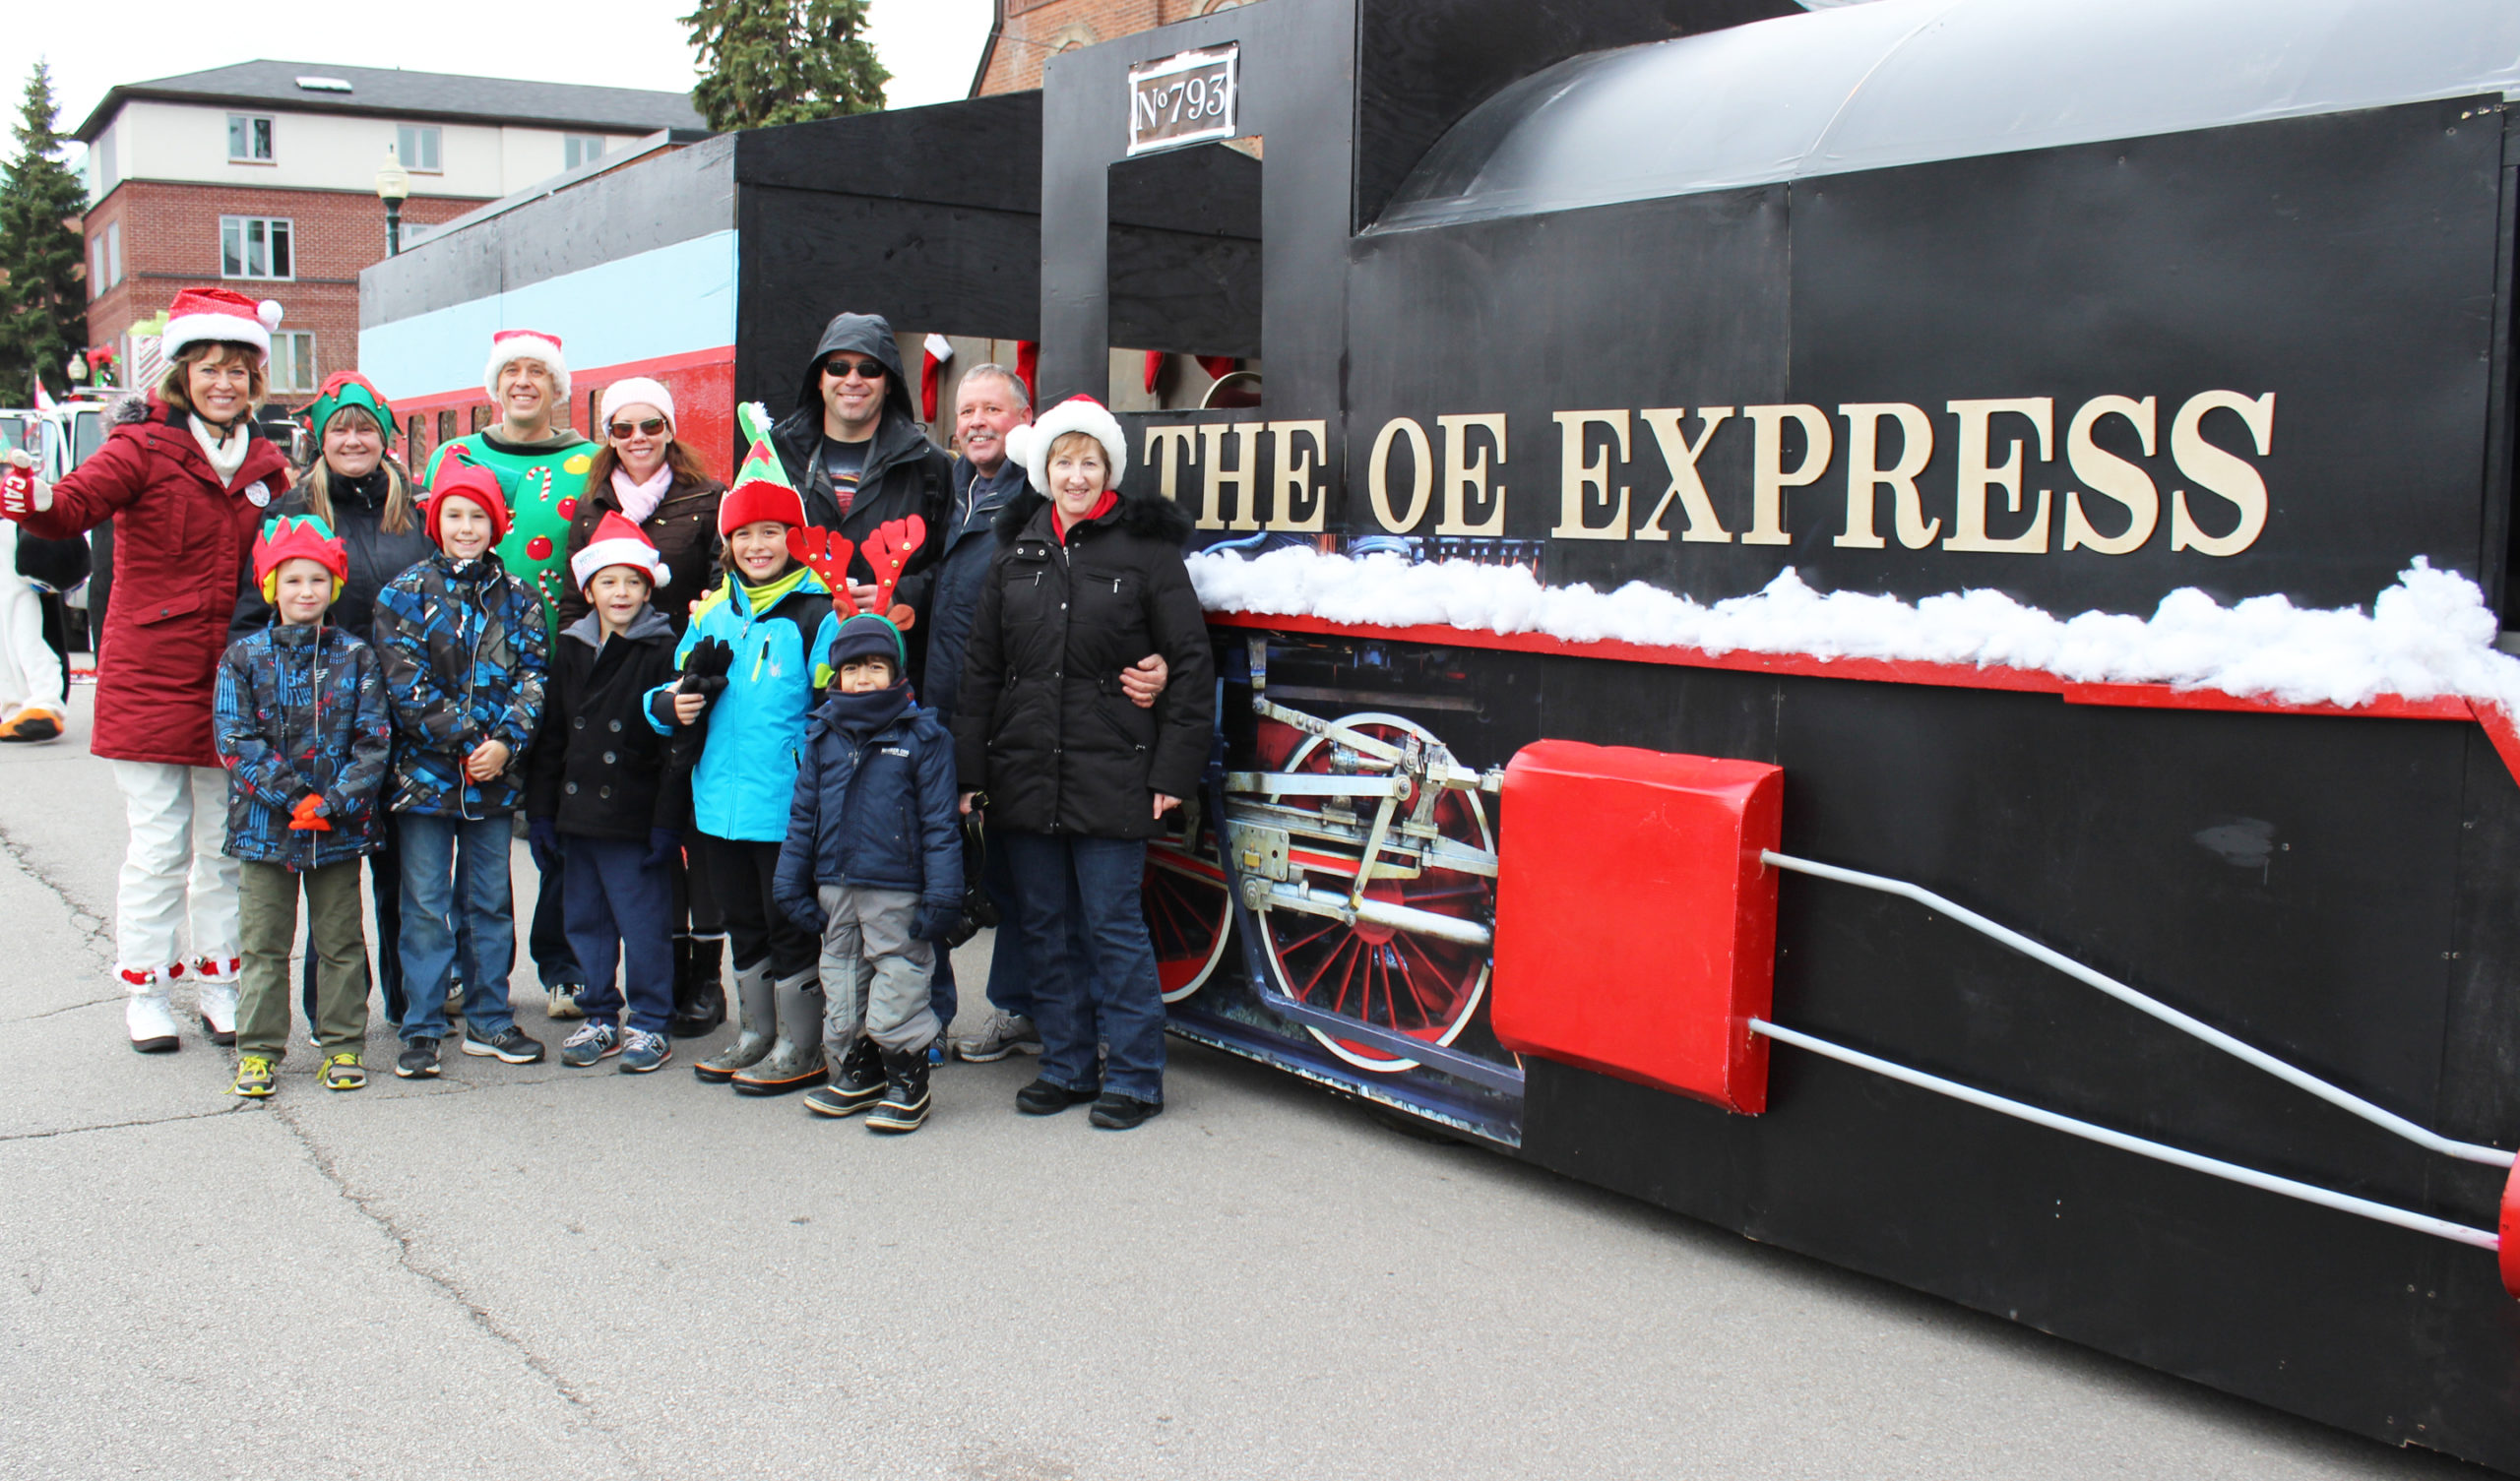 The Santa Claus parade attracted Local 793 members and families.